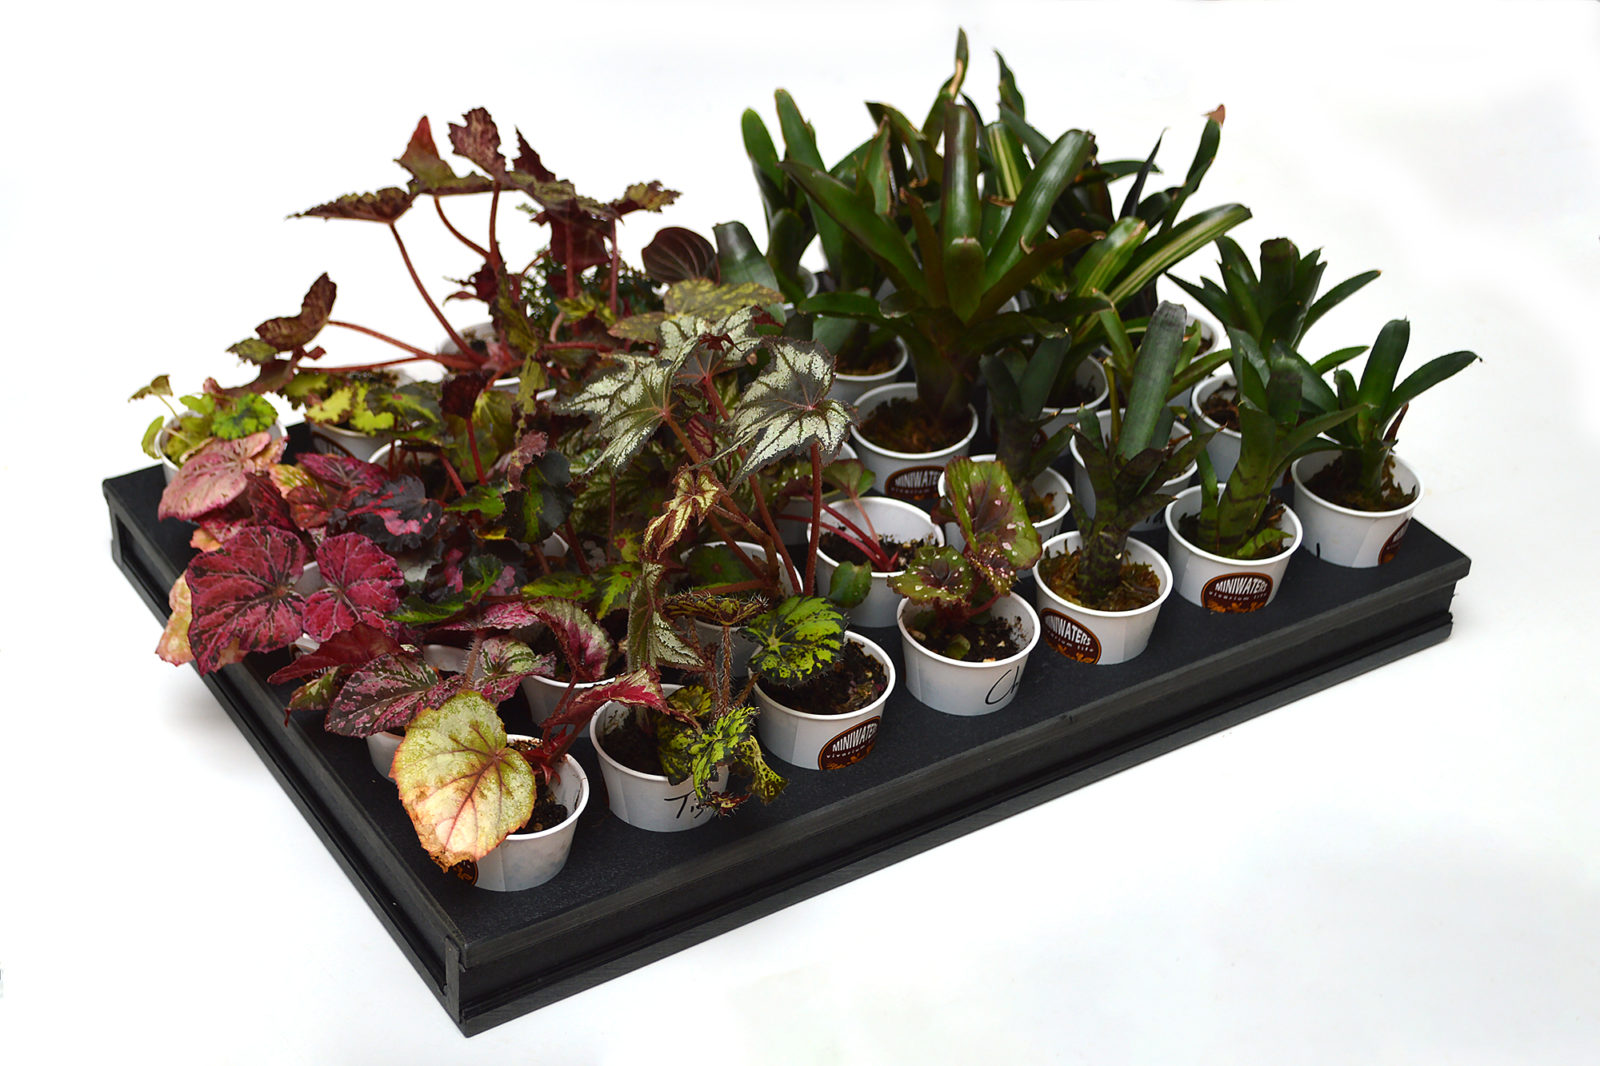 Vivarium plants from MiniWaters, an endless array of form and color!